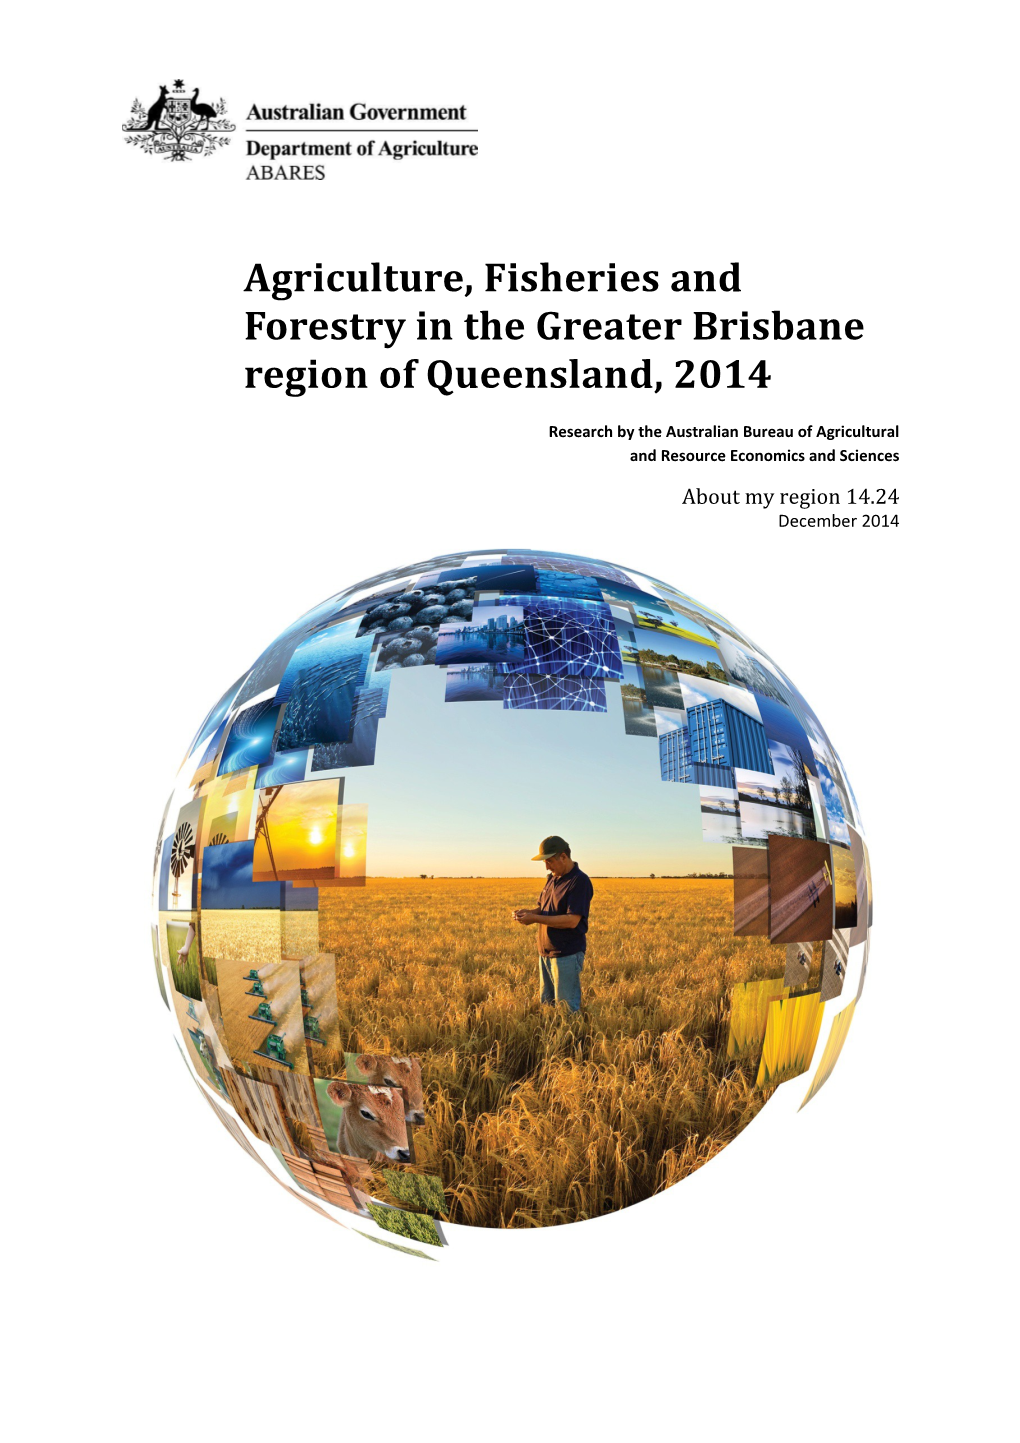 Agriculture, Fisheries and Forestry in the Greater Brisbane Region of Queensland, 2014 ABARES